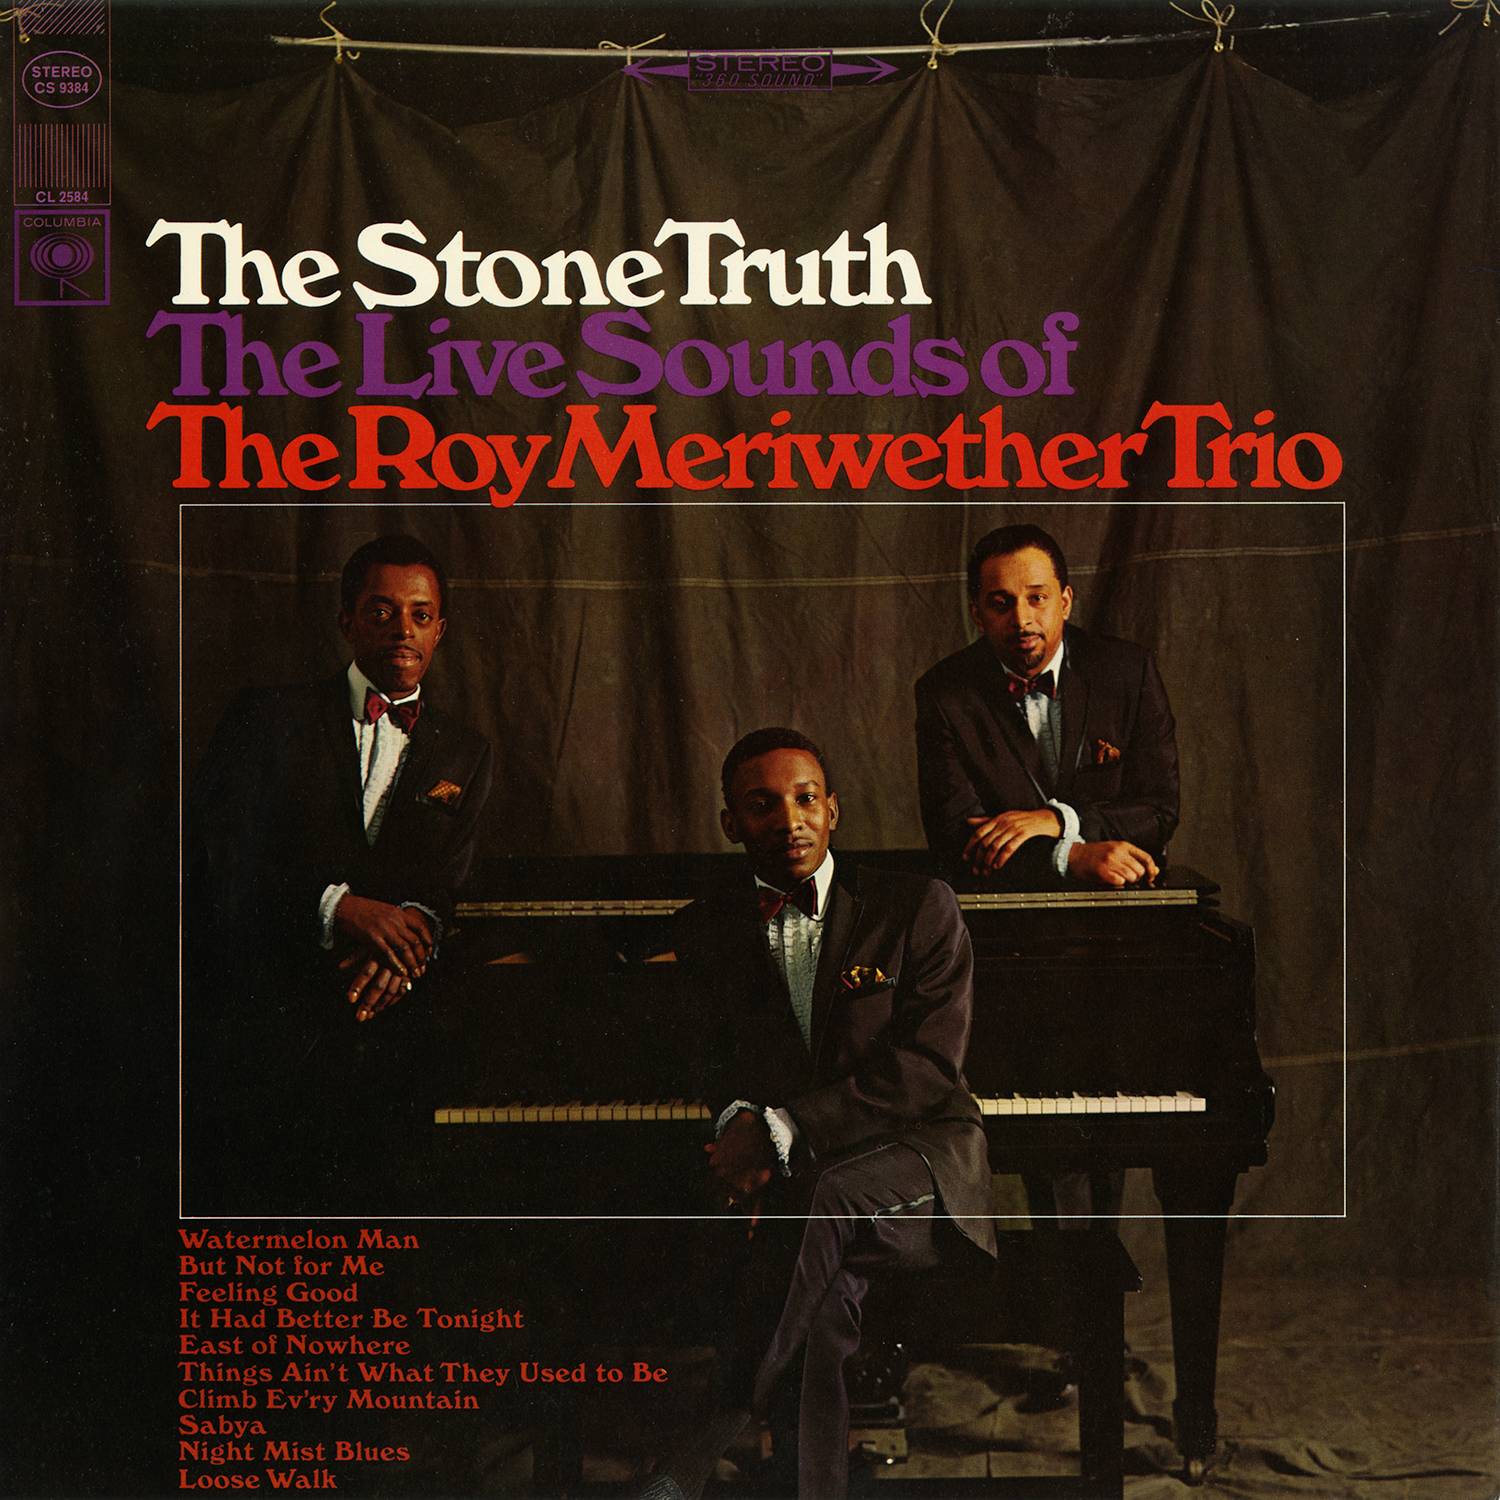 The Roy Meriwether Trio – The Stone Truth (1966/2016) [AcousticSounds FLAC 24bit/192kHz]